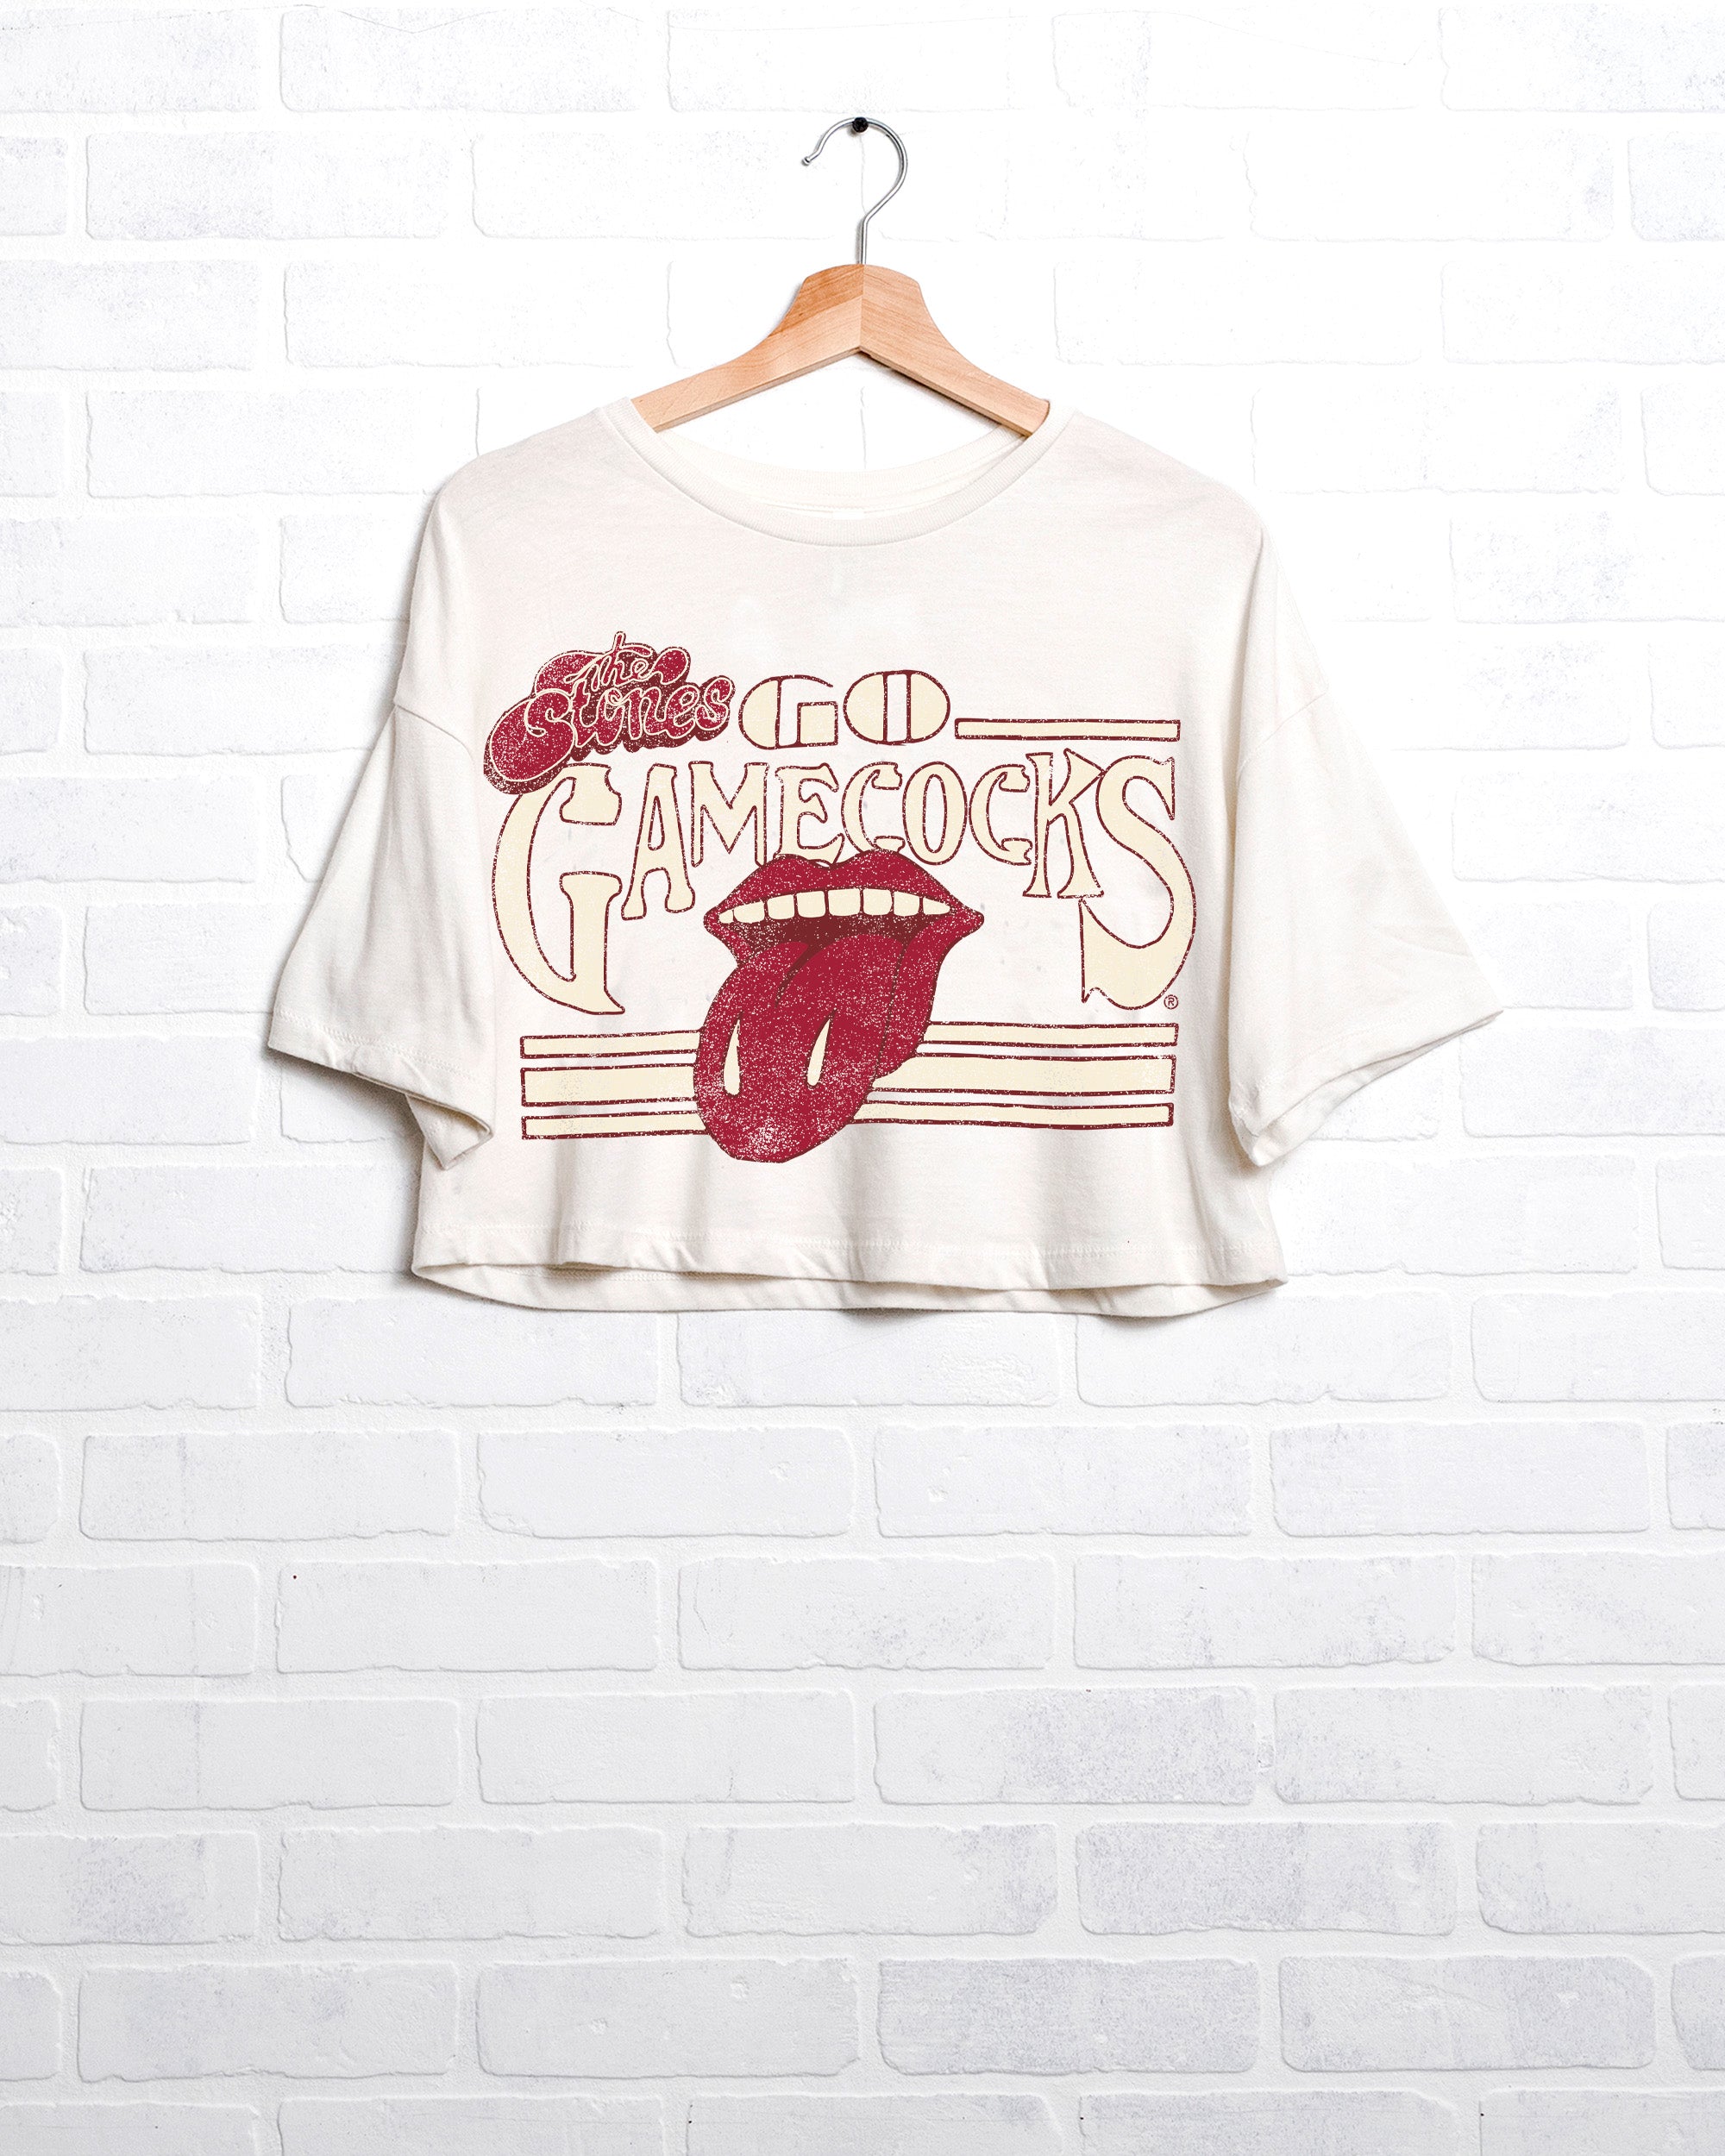 Rolling Stones Gamecocks Stoned White Cropped Tee - shoplivylu